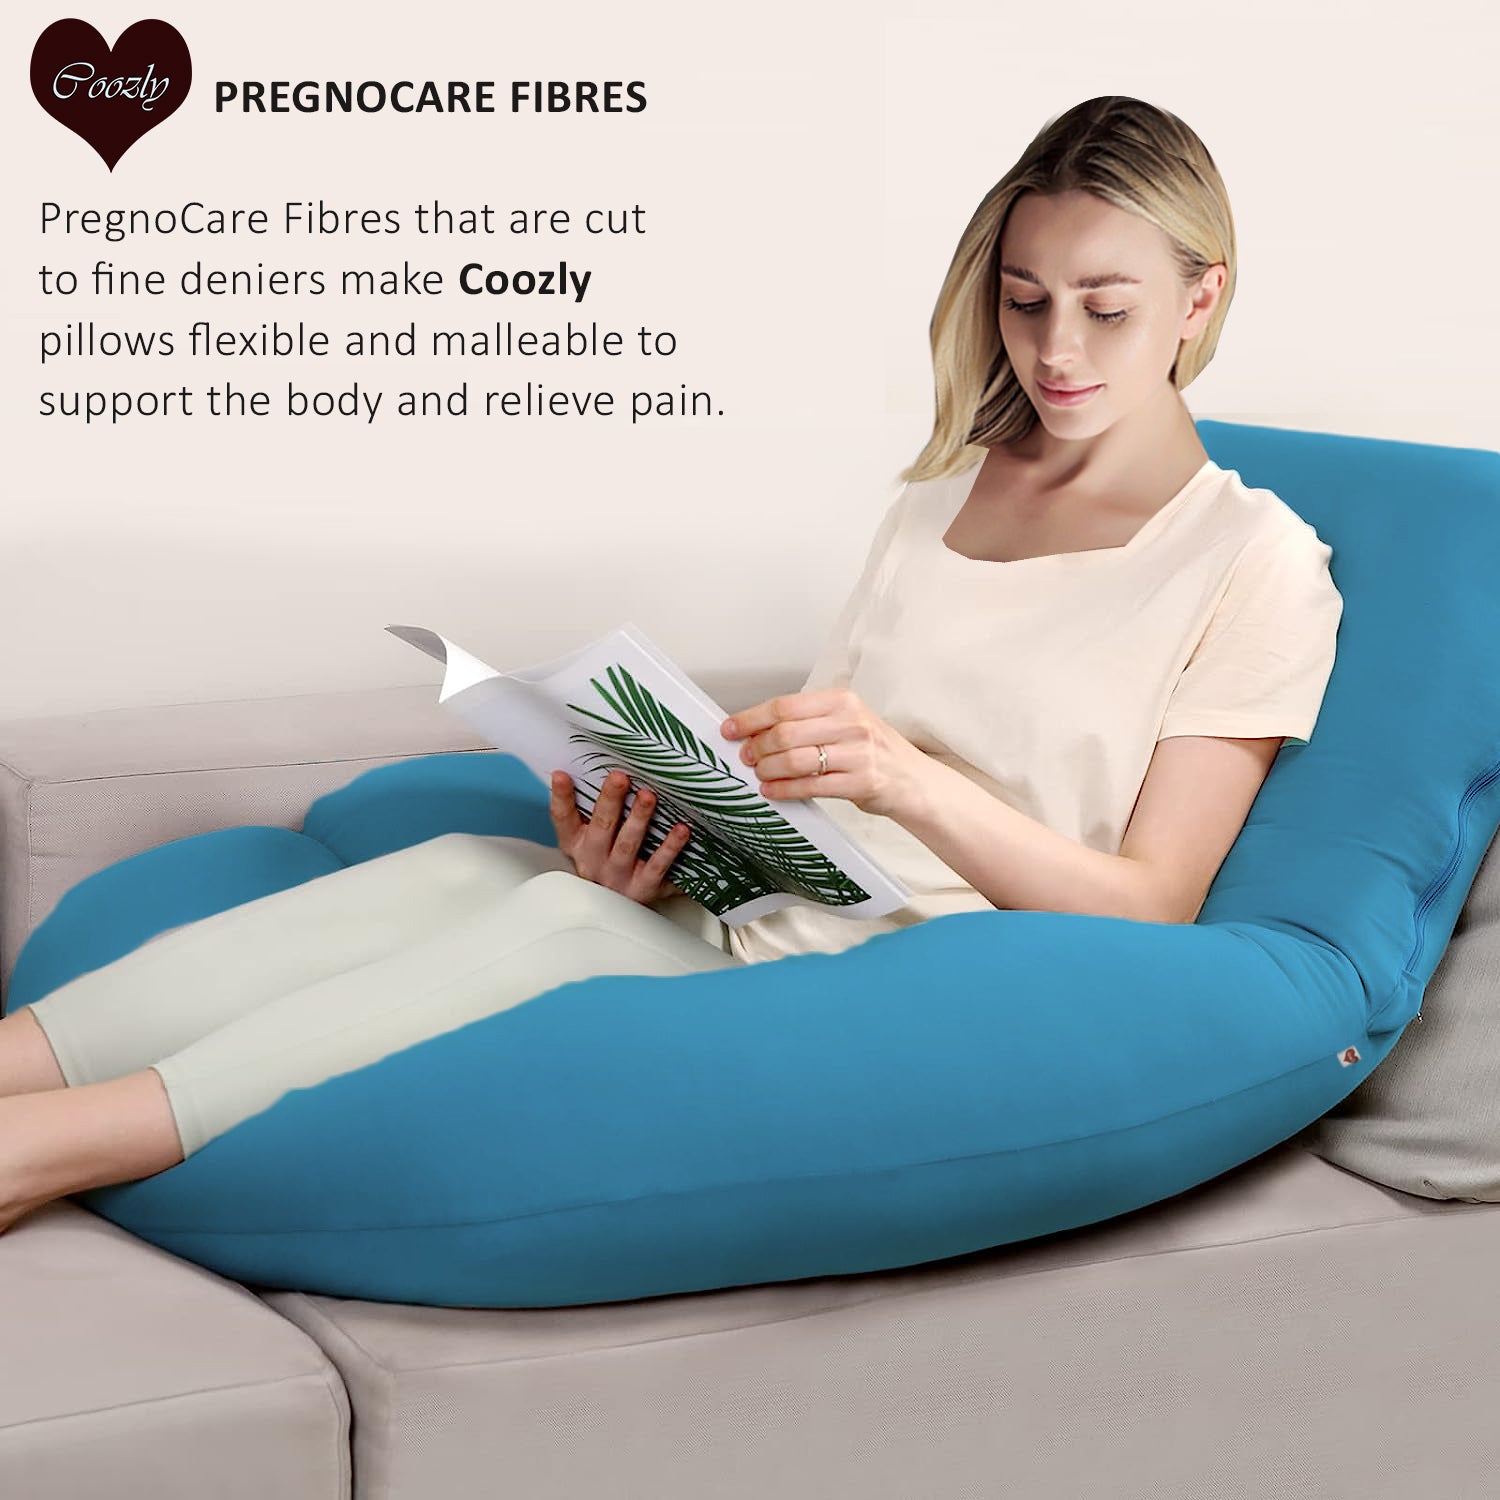 Turquoise-Coozly Belly Back Pregnancy Pillow